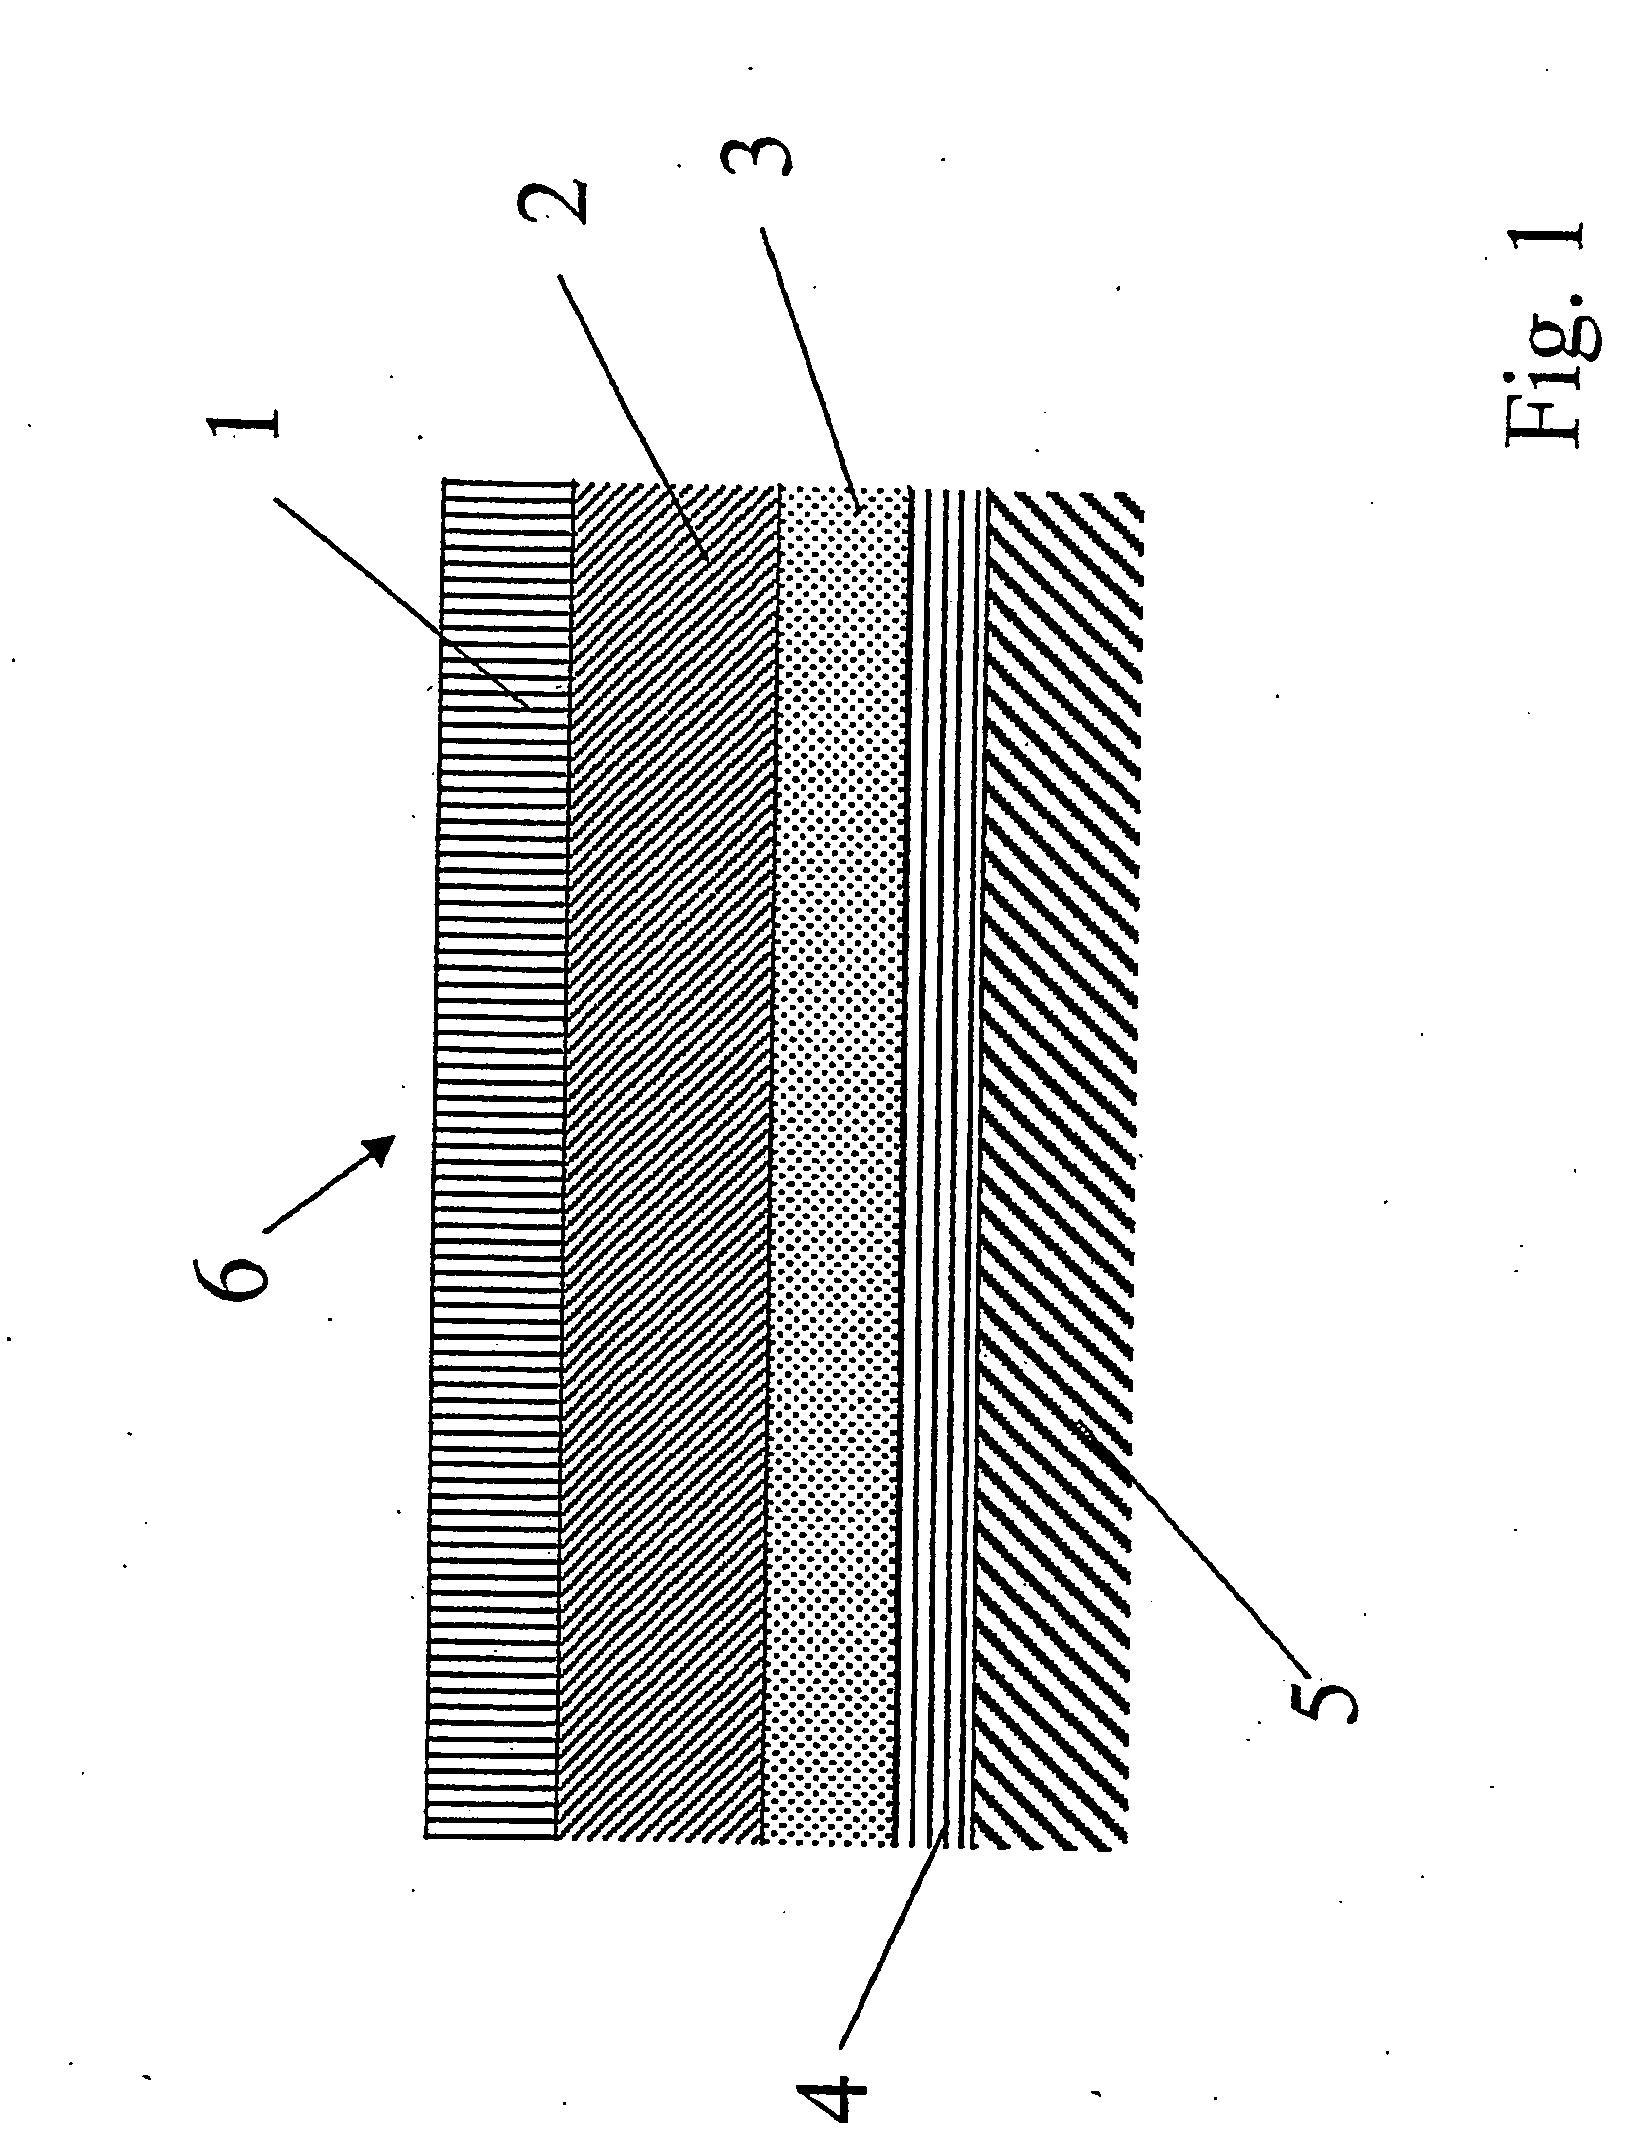 Coated printing sheet and process for making same